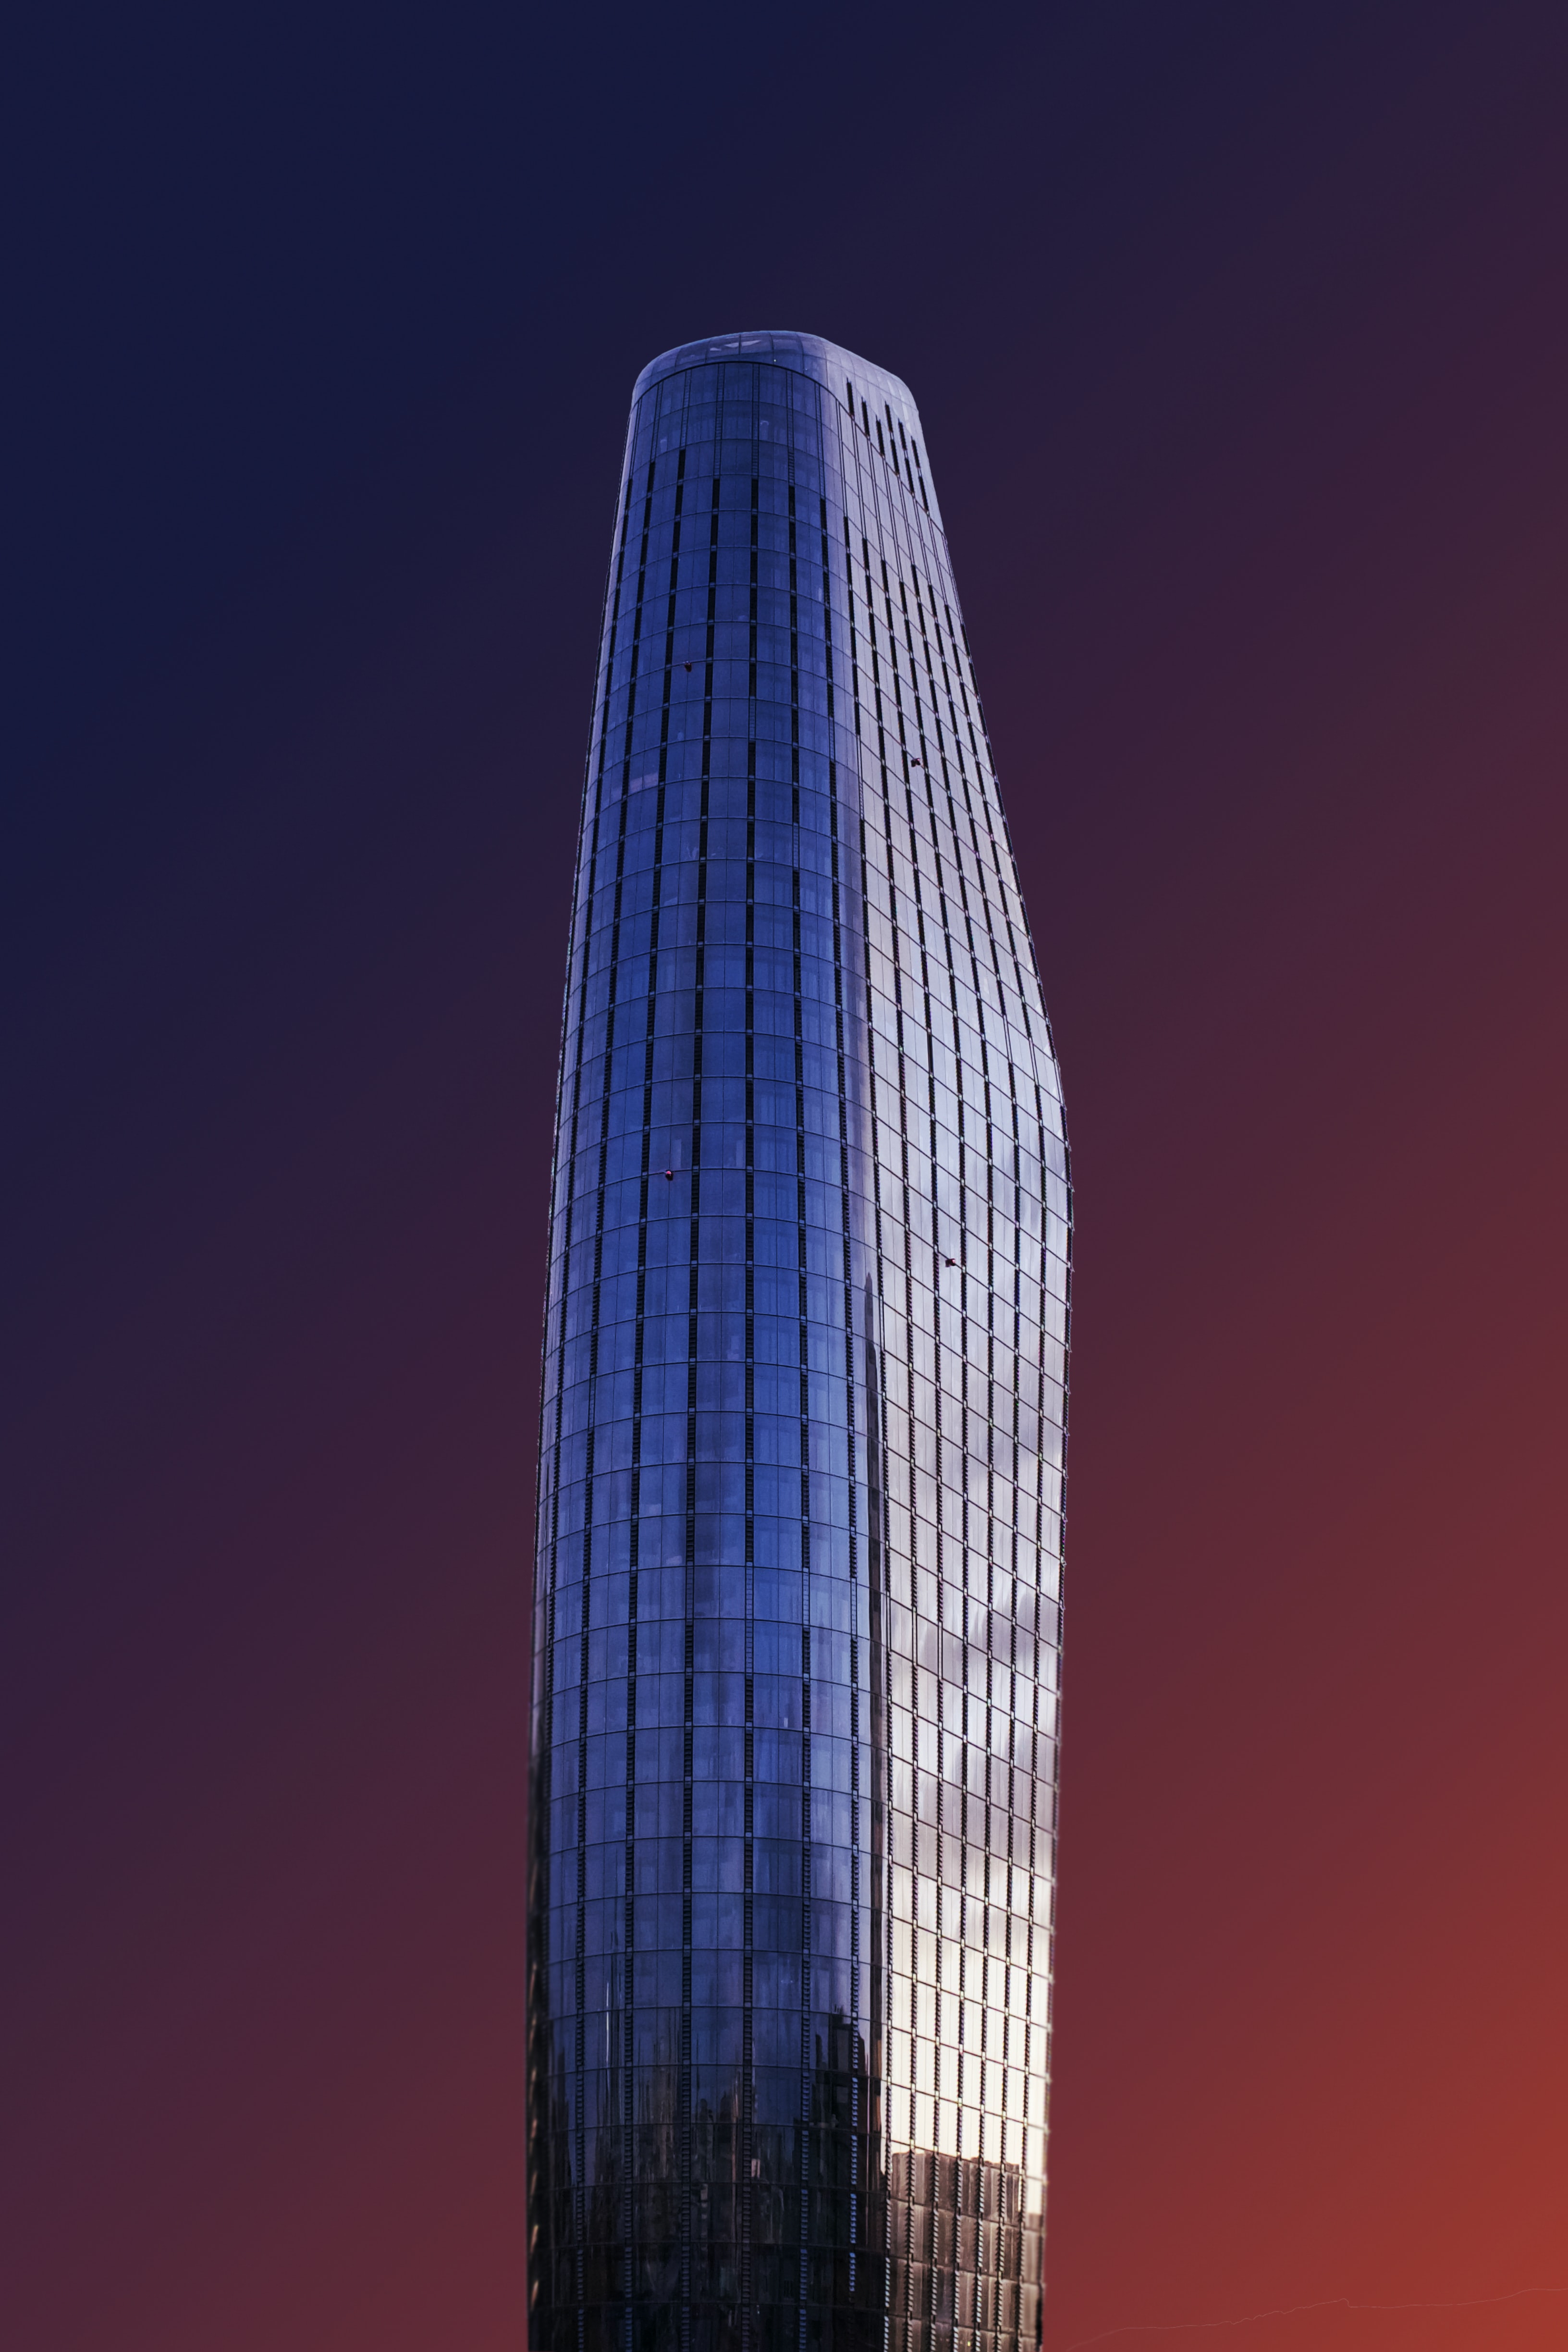 minimalism, architecture, skyscraper, building, tower, modern, up to date